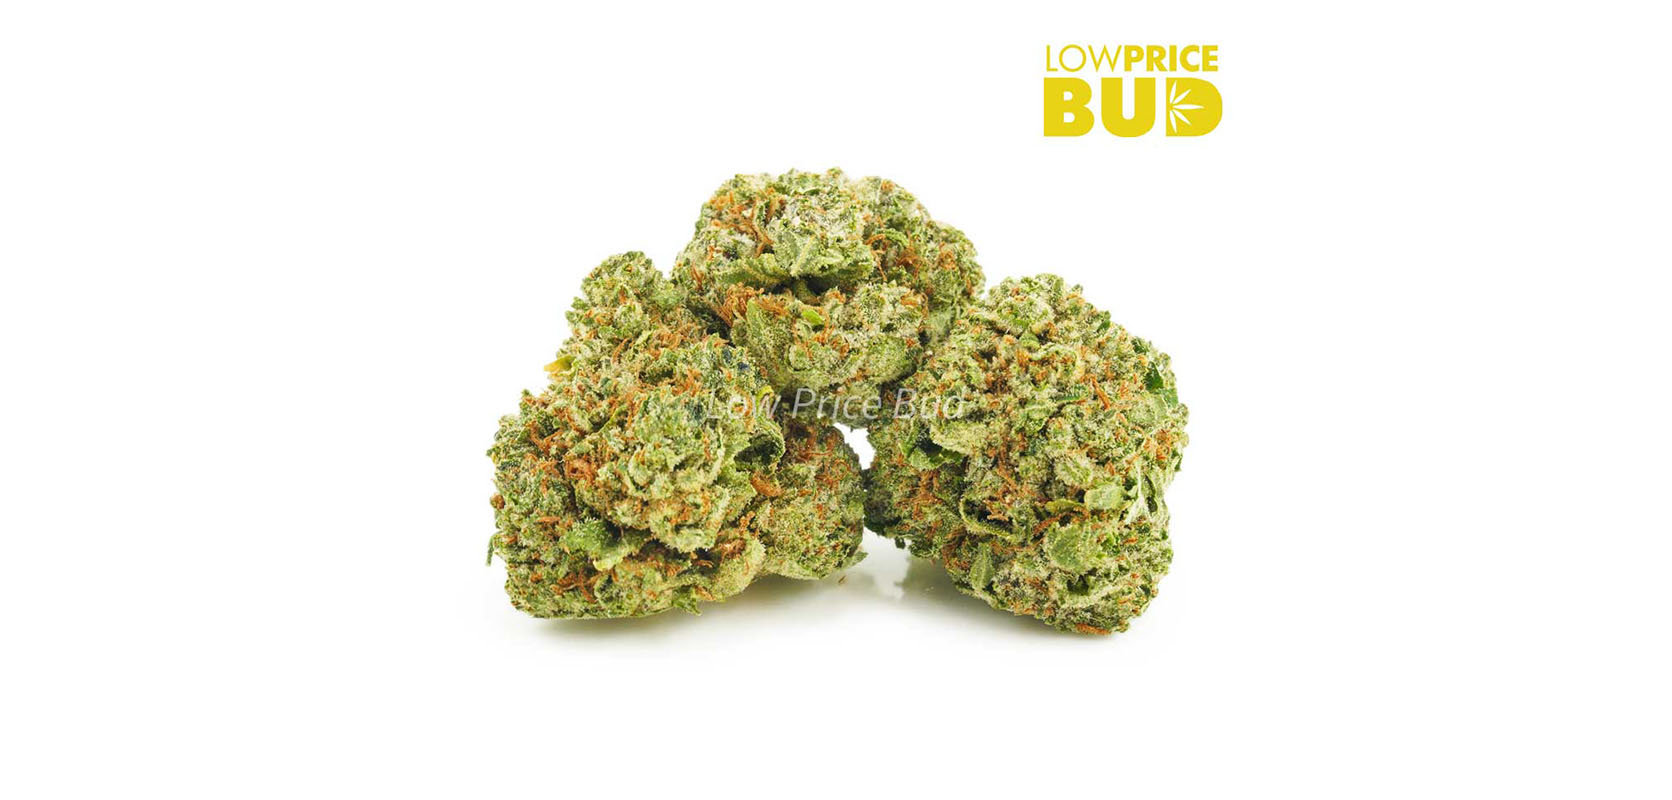 Buy cannabis online Blue God AAA weed strain from the best online dispensary and mail order marijuana weed online low price bud dispensary.